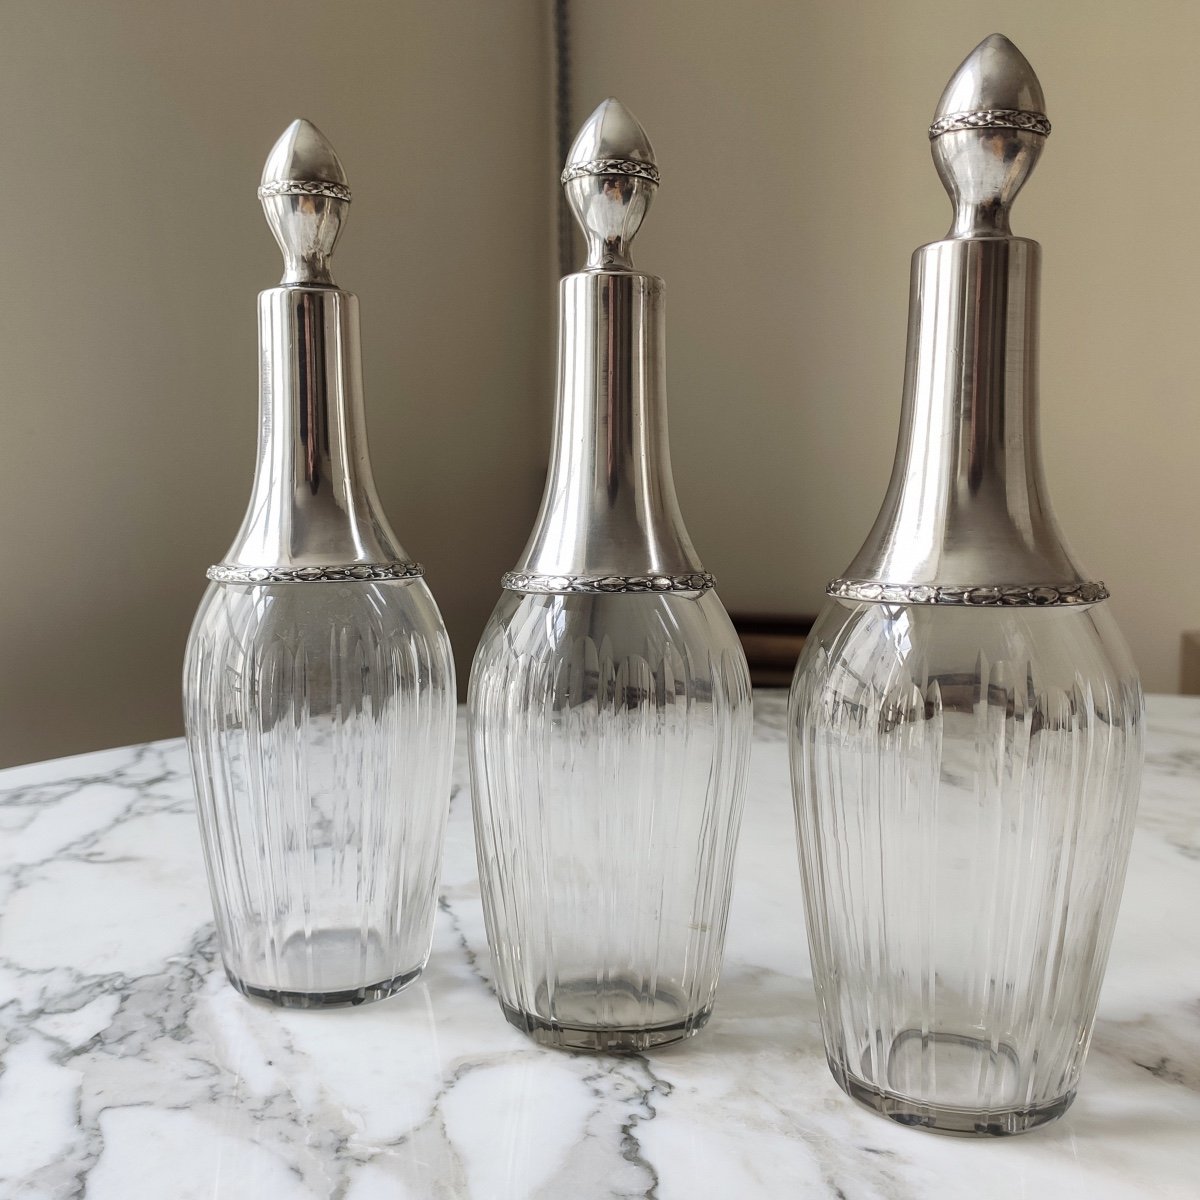 Adrien Mathiss: Beautiful Suite Of Three Alcohol Decanters In Glass And Solid Silver, St. Louis XV